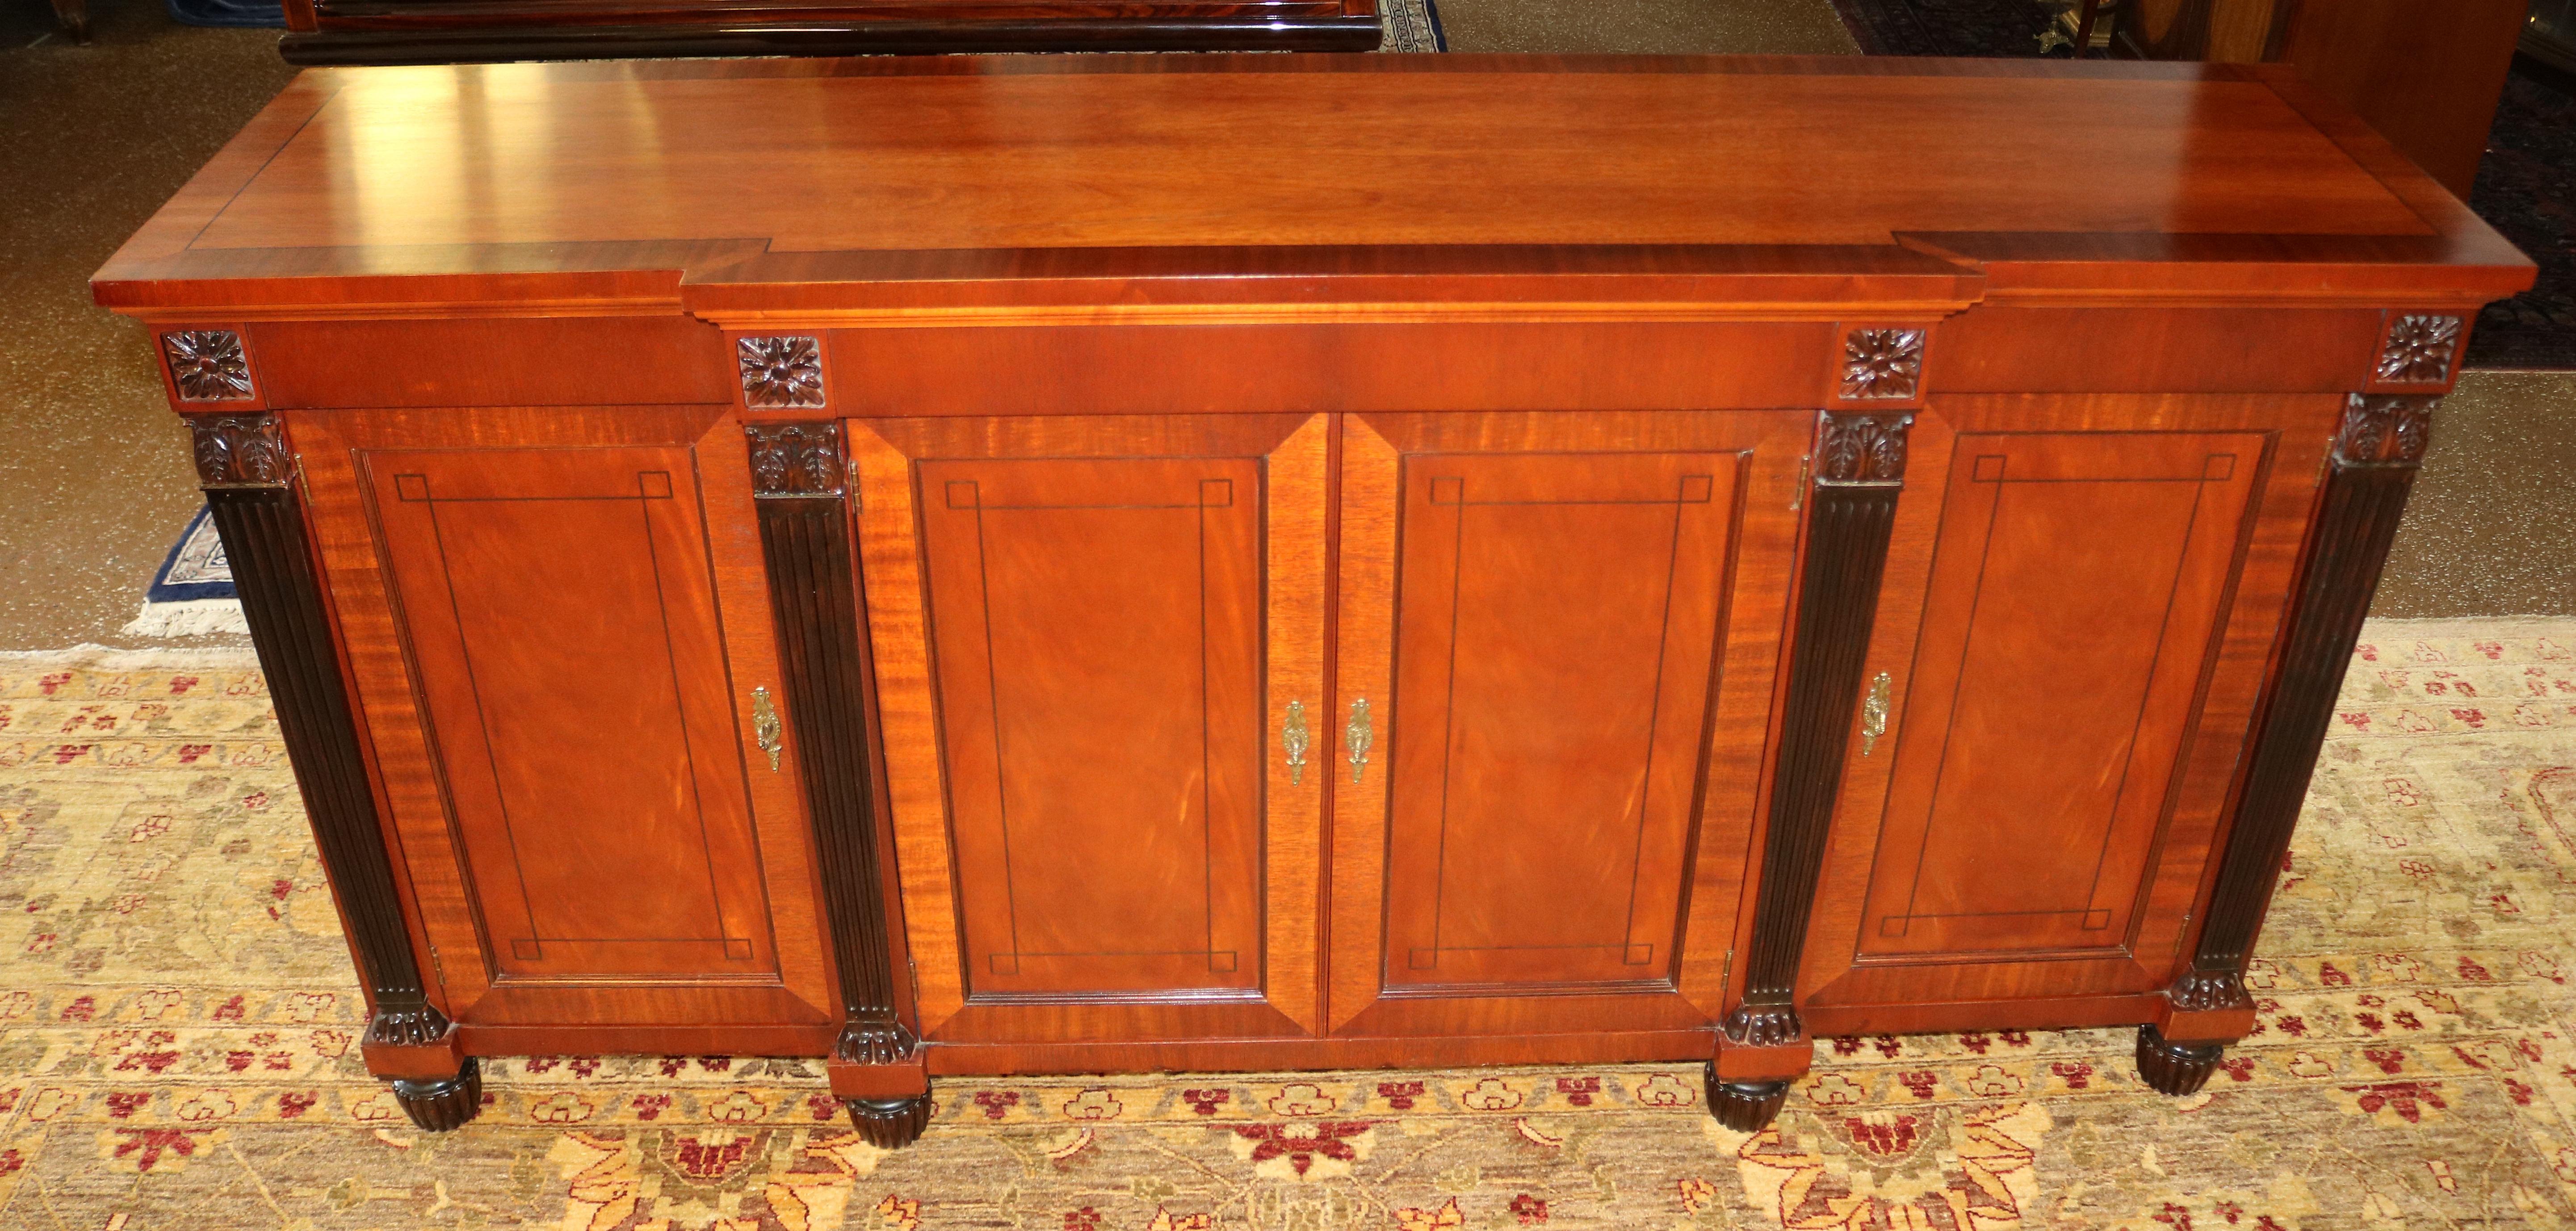 ​Baker Mahogany Neoclassical French Empire Style Credenza Server Sideboard

Dimensions : 72